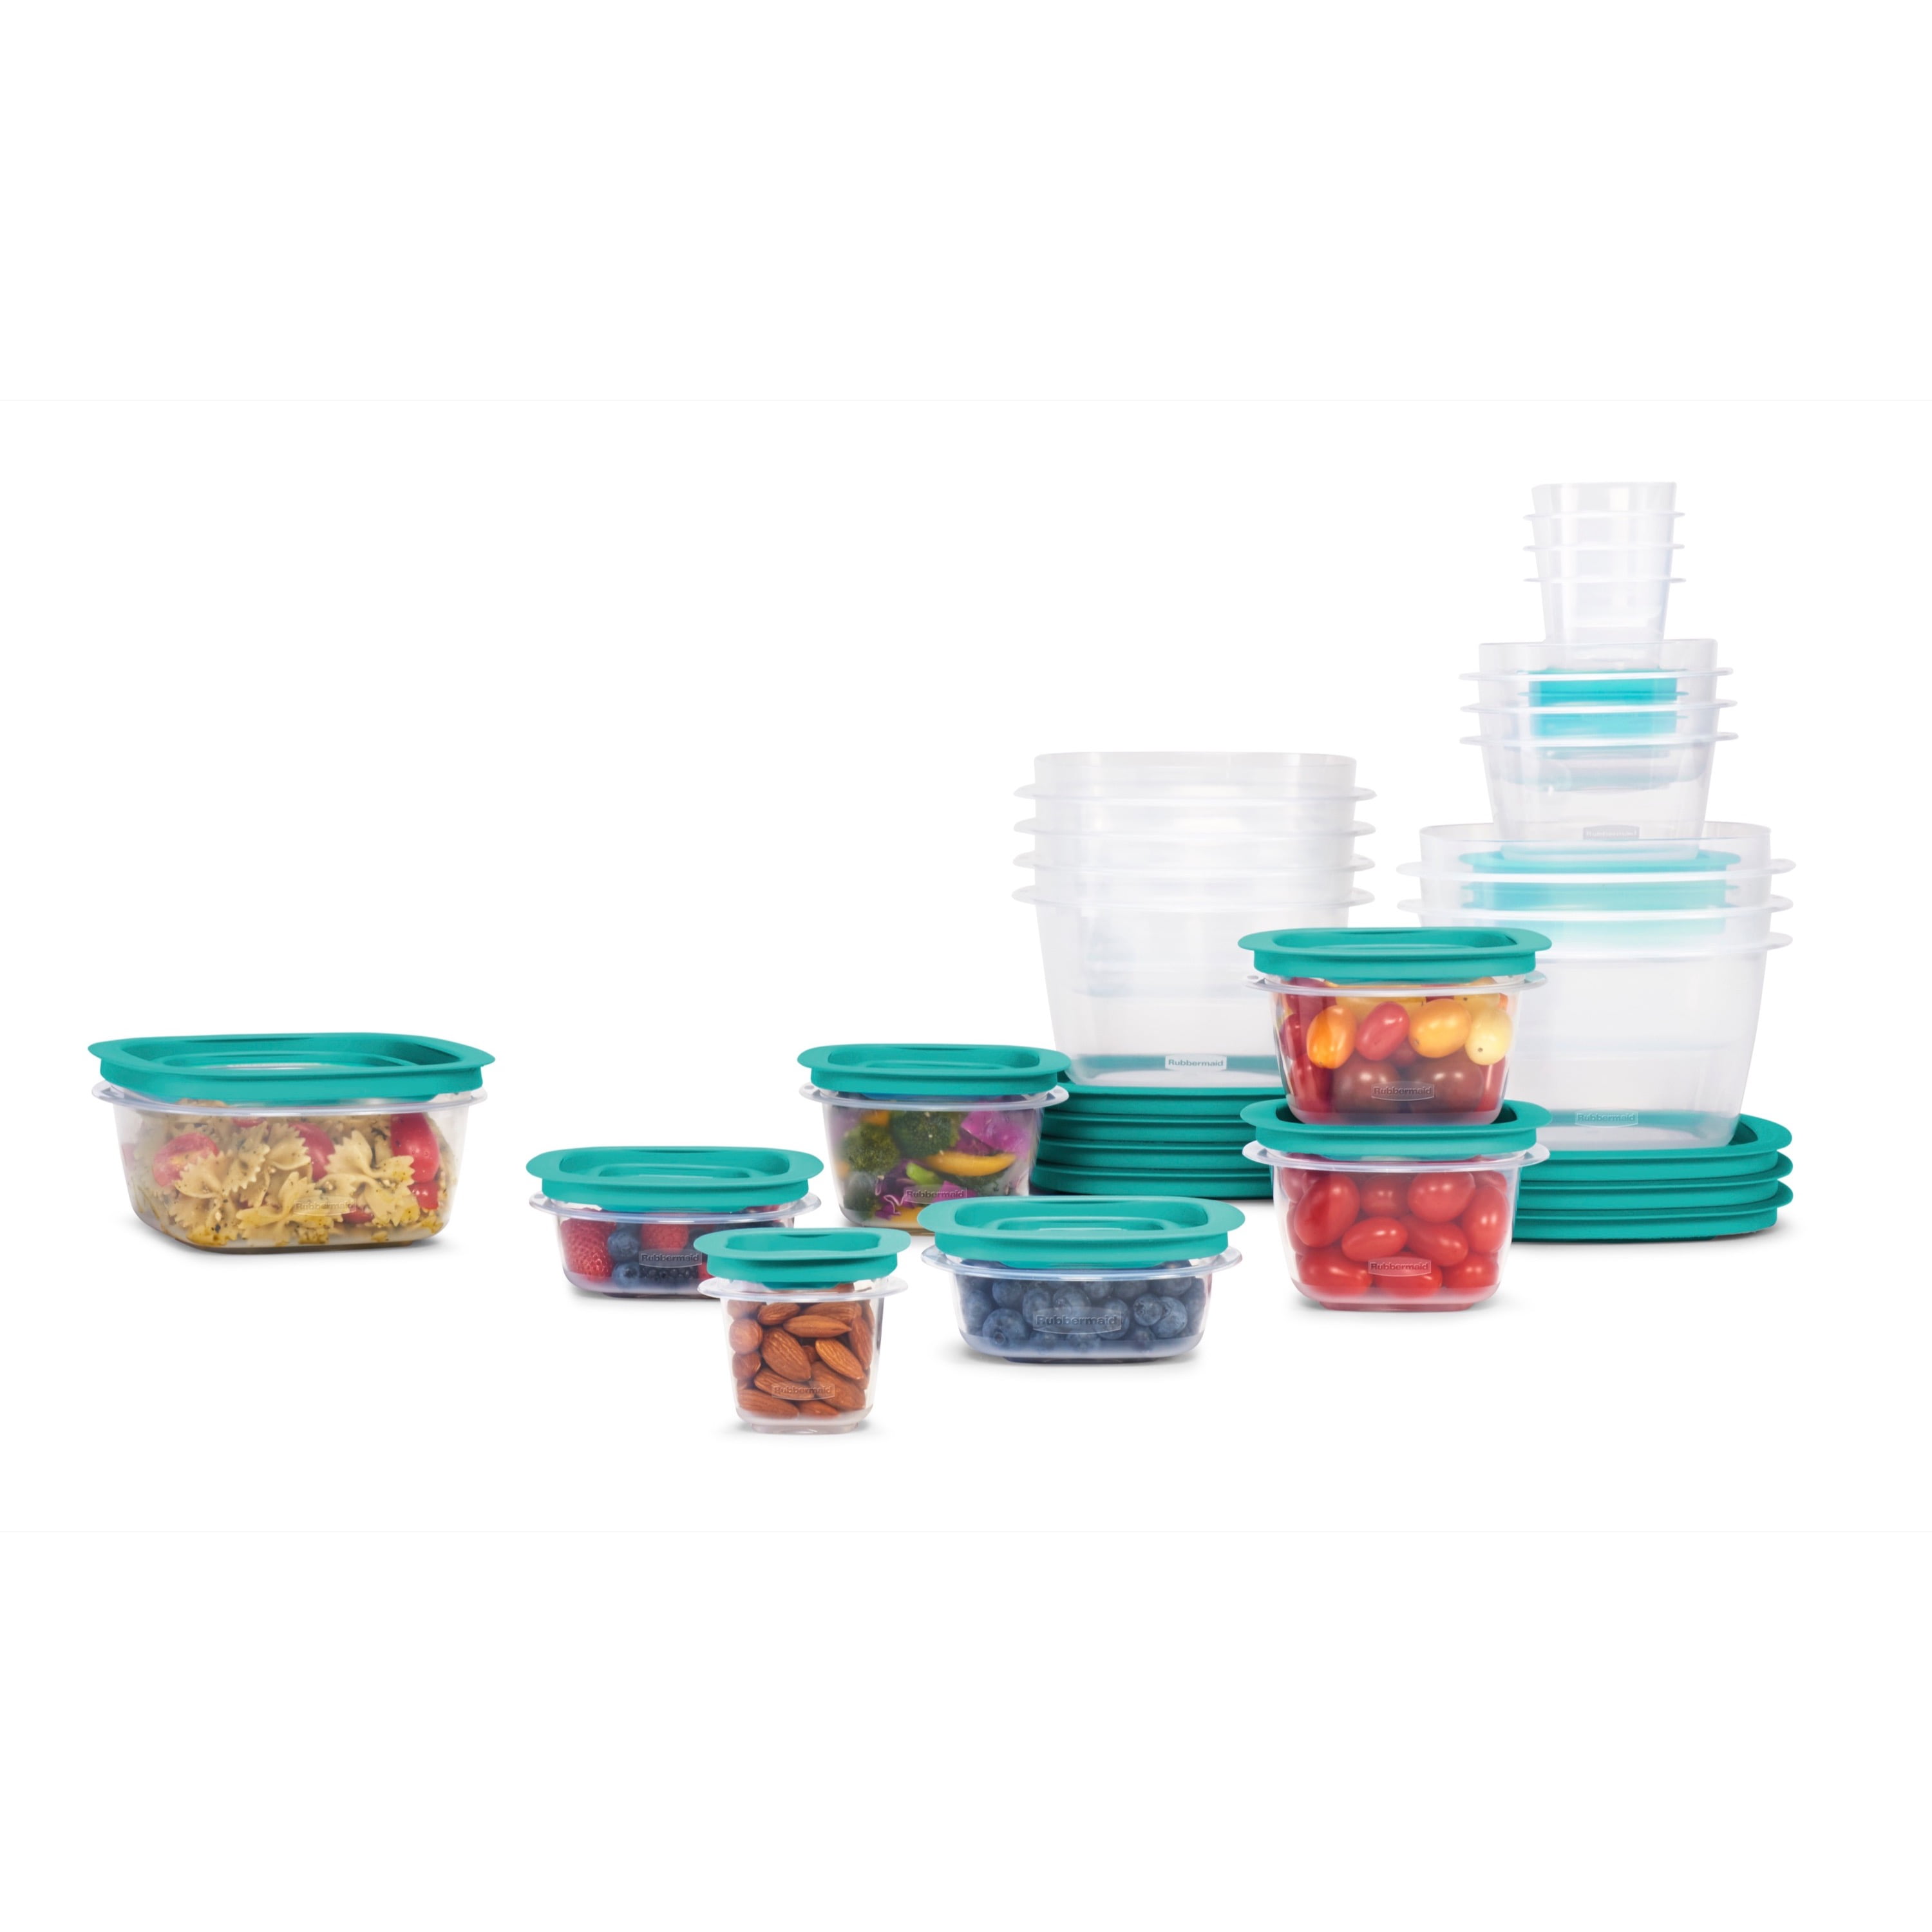  Utensilux Rubbermaid Premier Extra Large Size Container Bundle  Set One Each Of, 9 Cup and 14 Cup Premier Flex & Seal Food Storage Set,  Tritan Containers, Grey Flex and Seal Lids